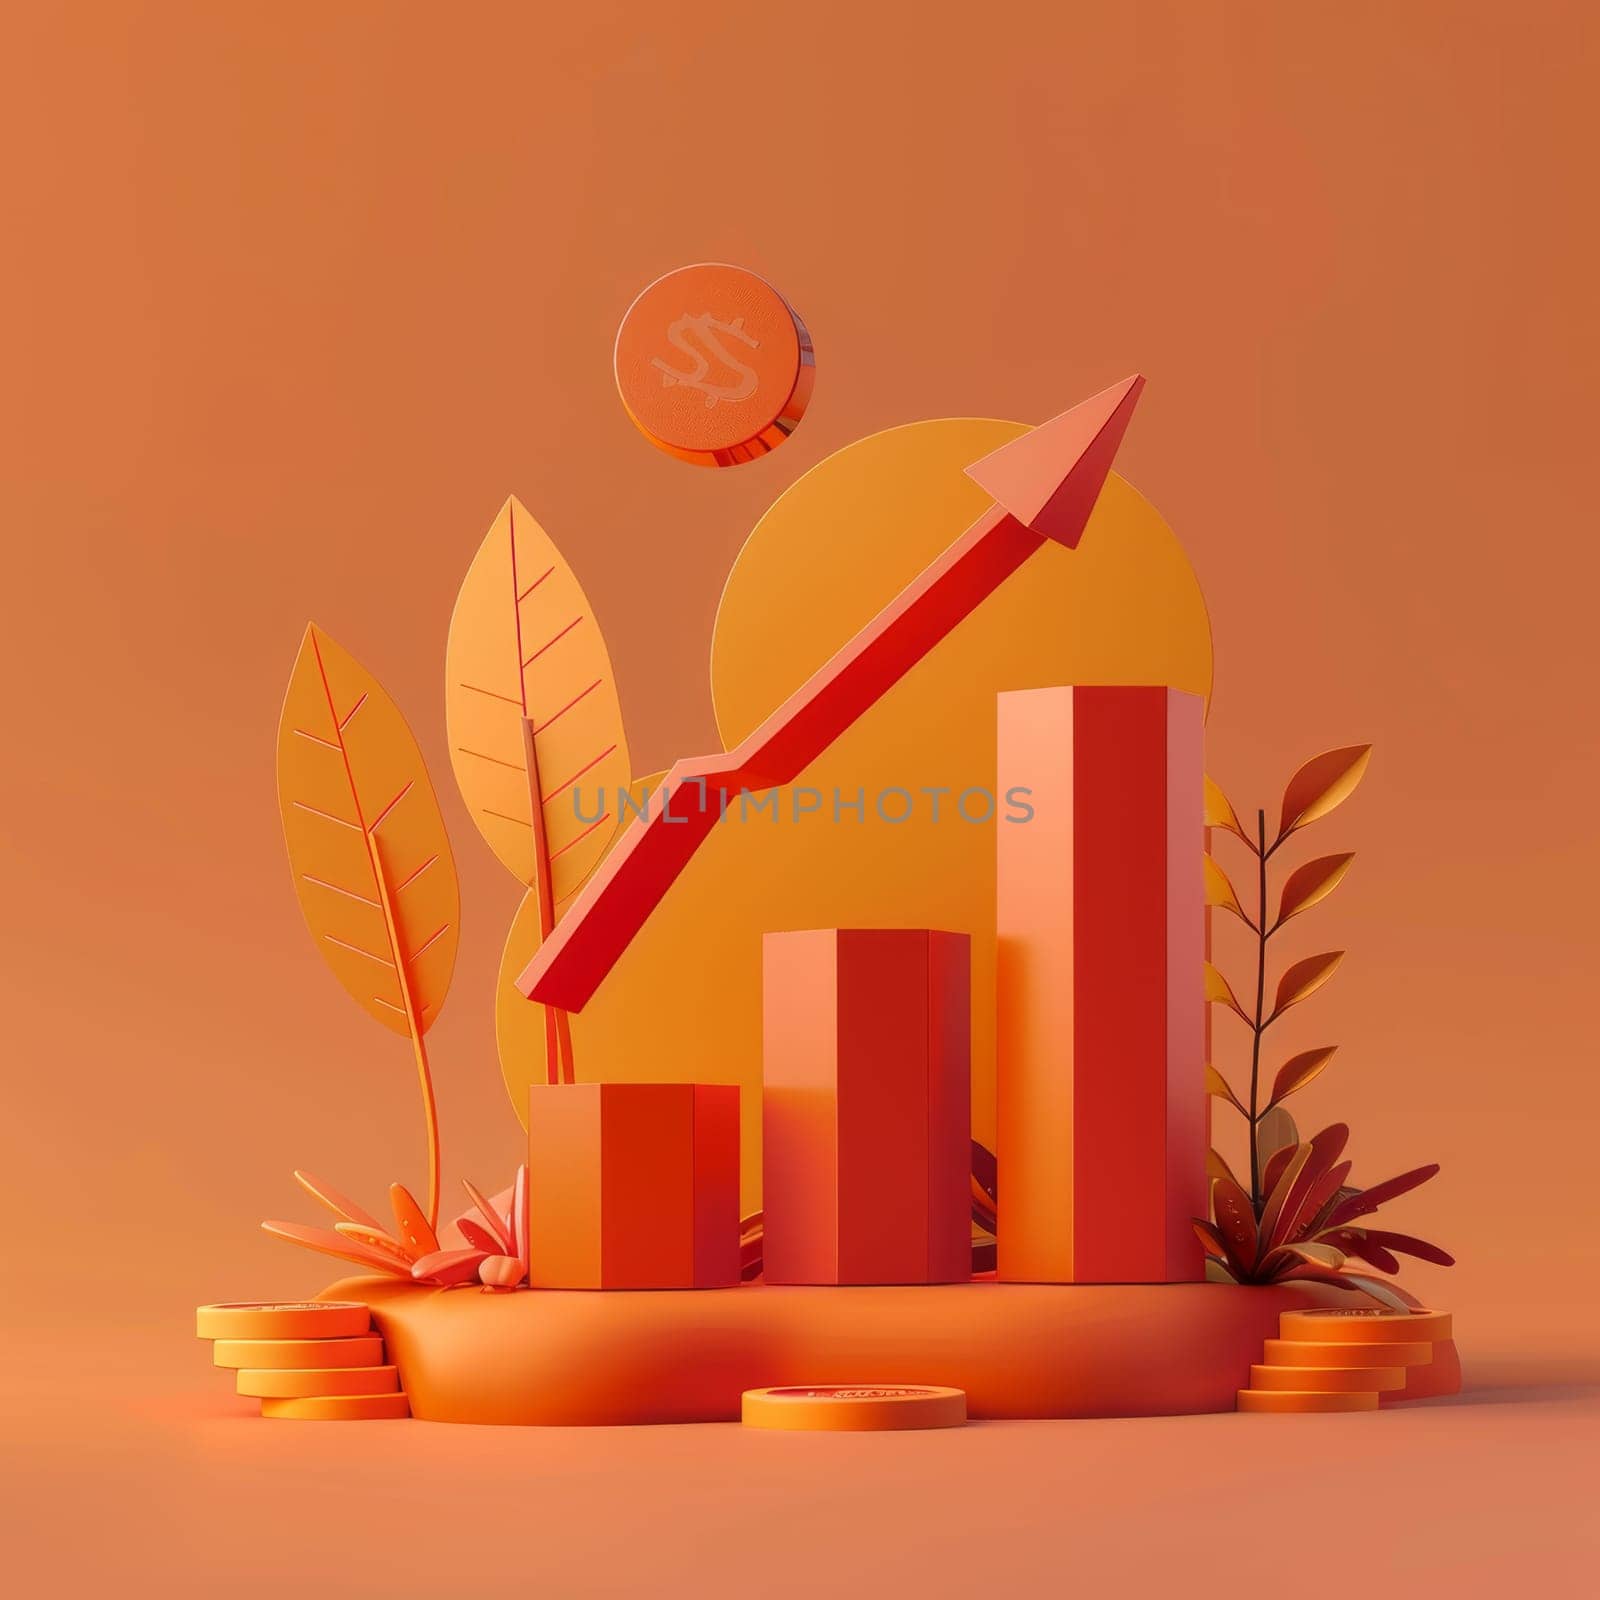 The schedule of investment trading on the stock market. The concept of financial growth with the growth of stocks. 3d illustration by Lobachad